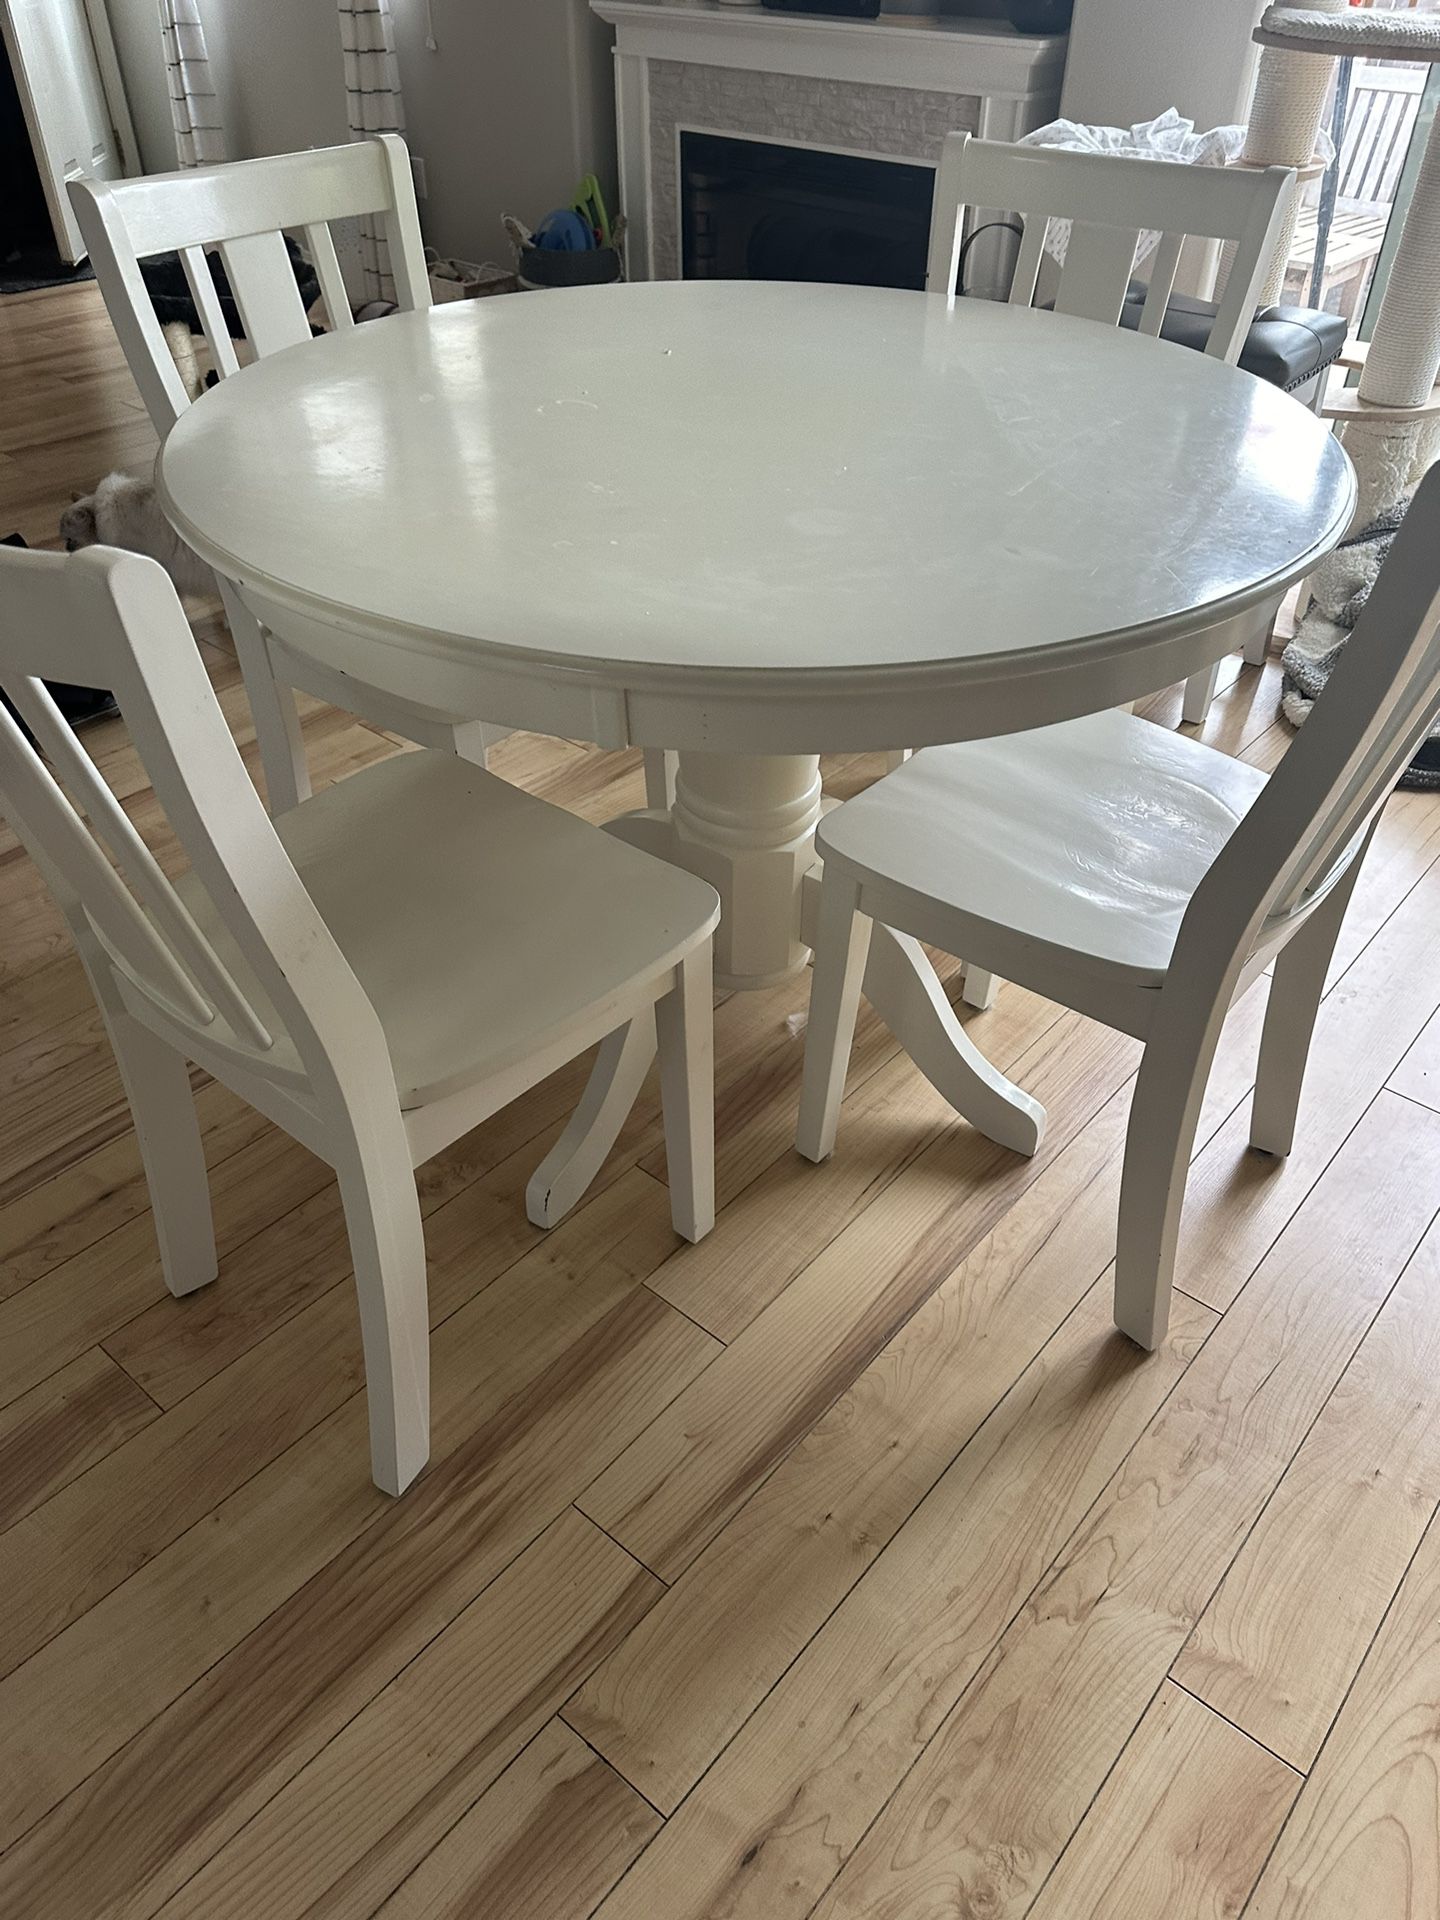 White Round Dining Room Table